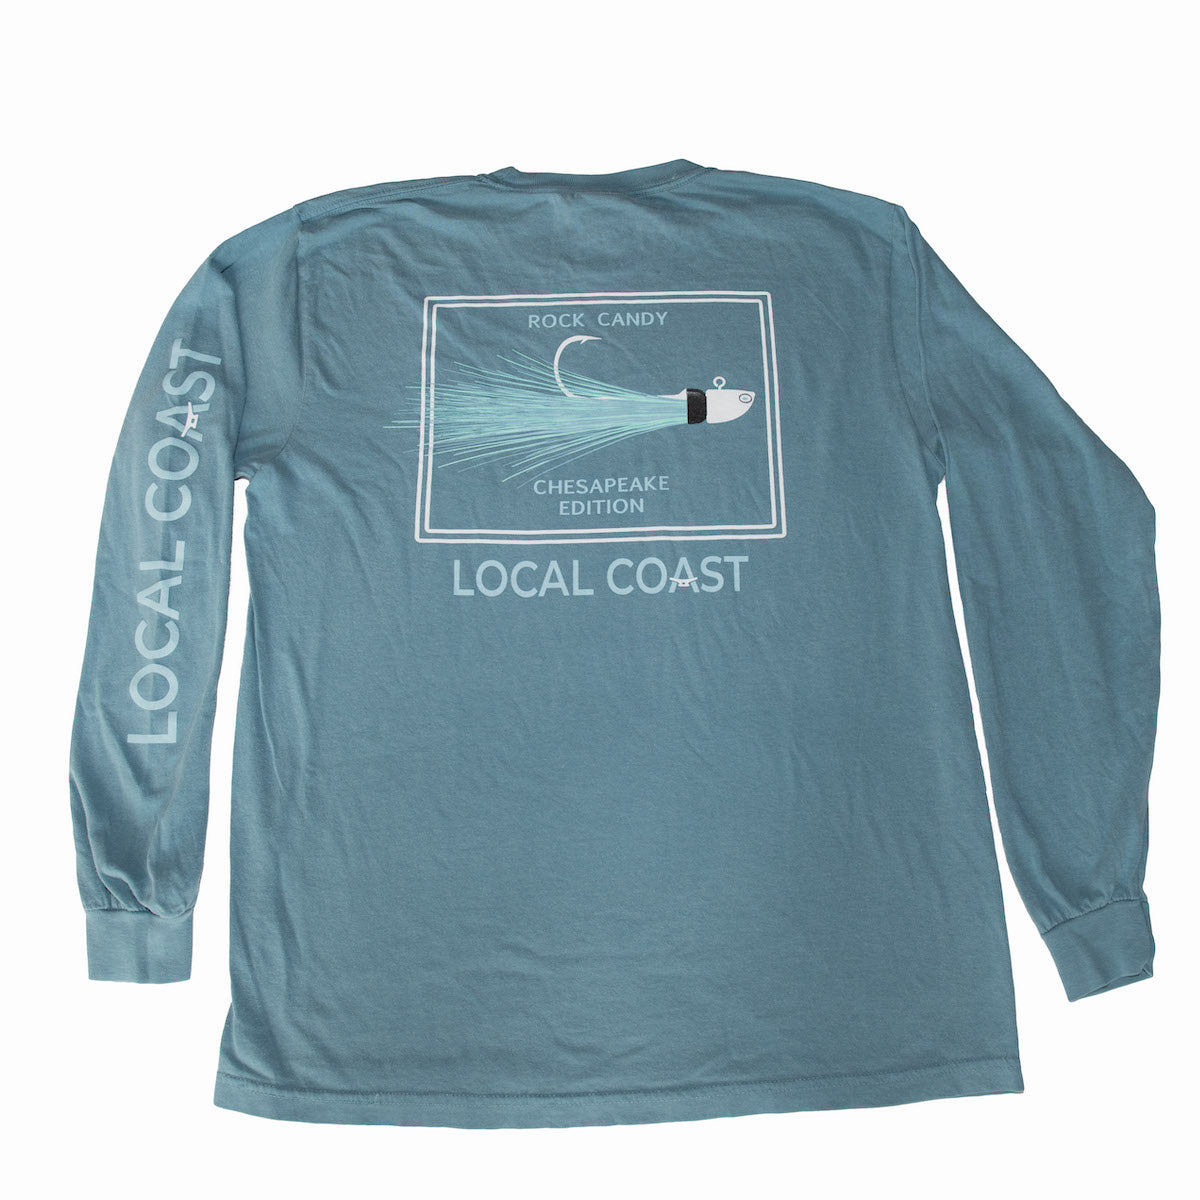 The Lure Long Sleeve